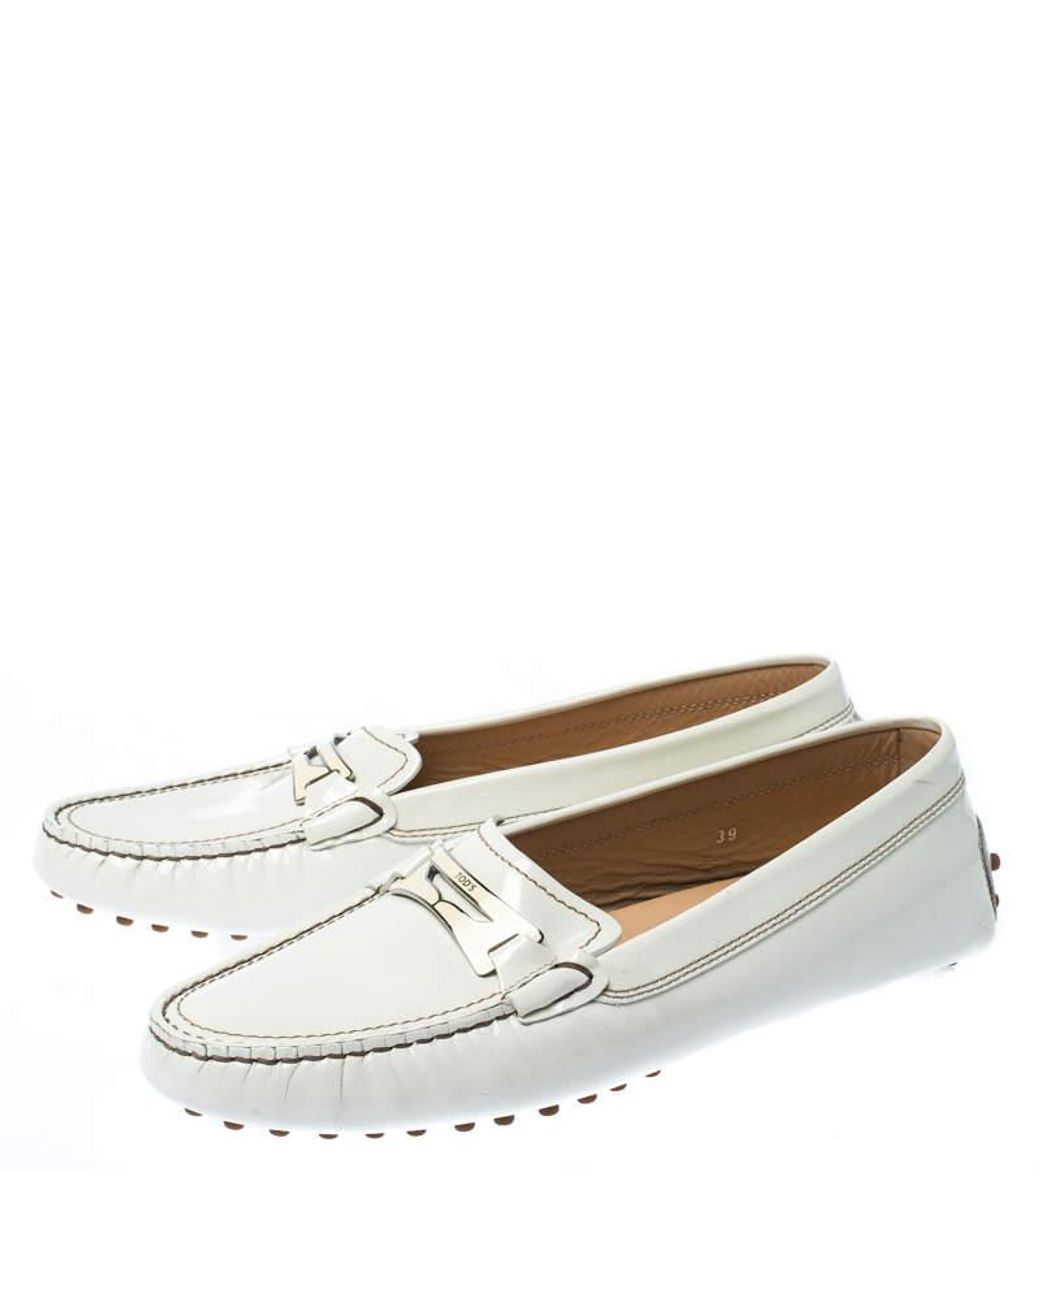 Tod's White Patent Leather Penny Loafers Size 39 - Lyst